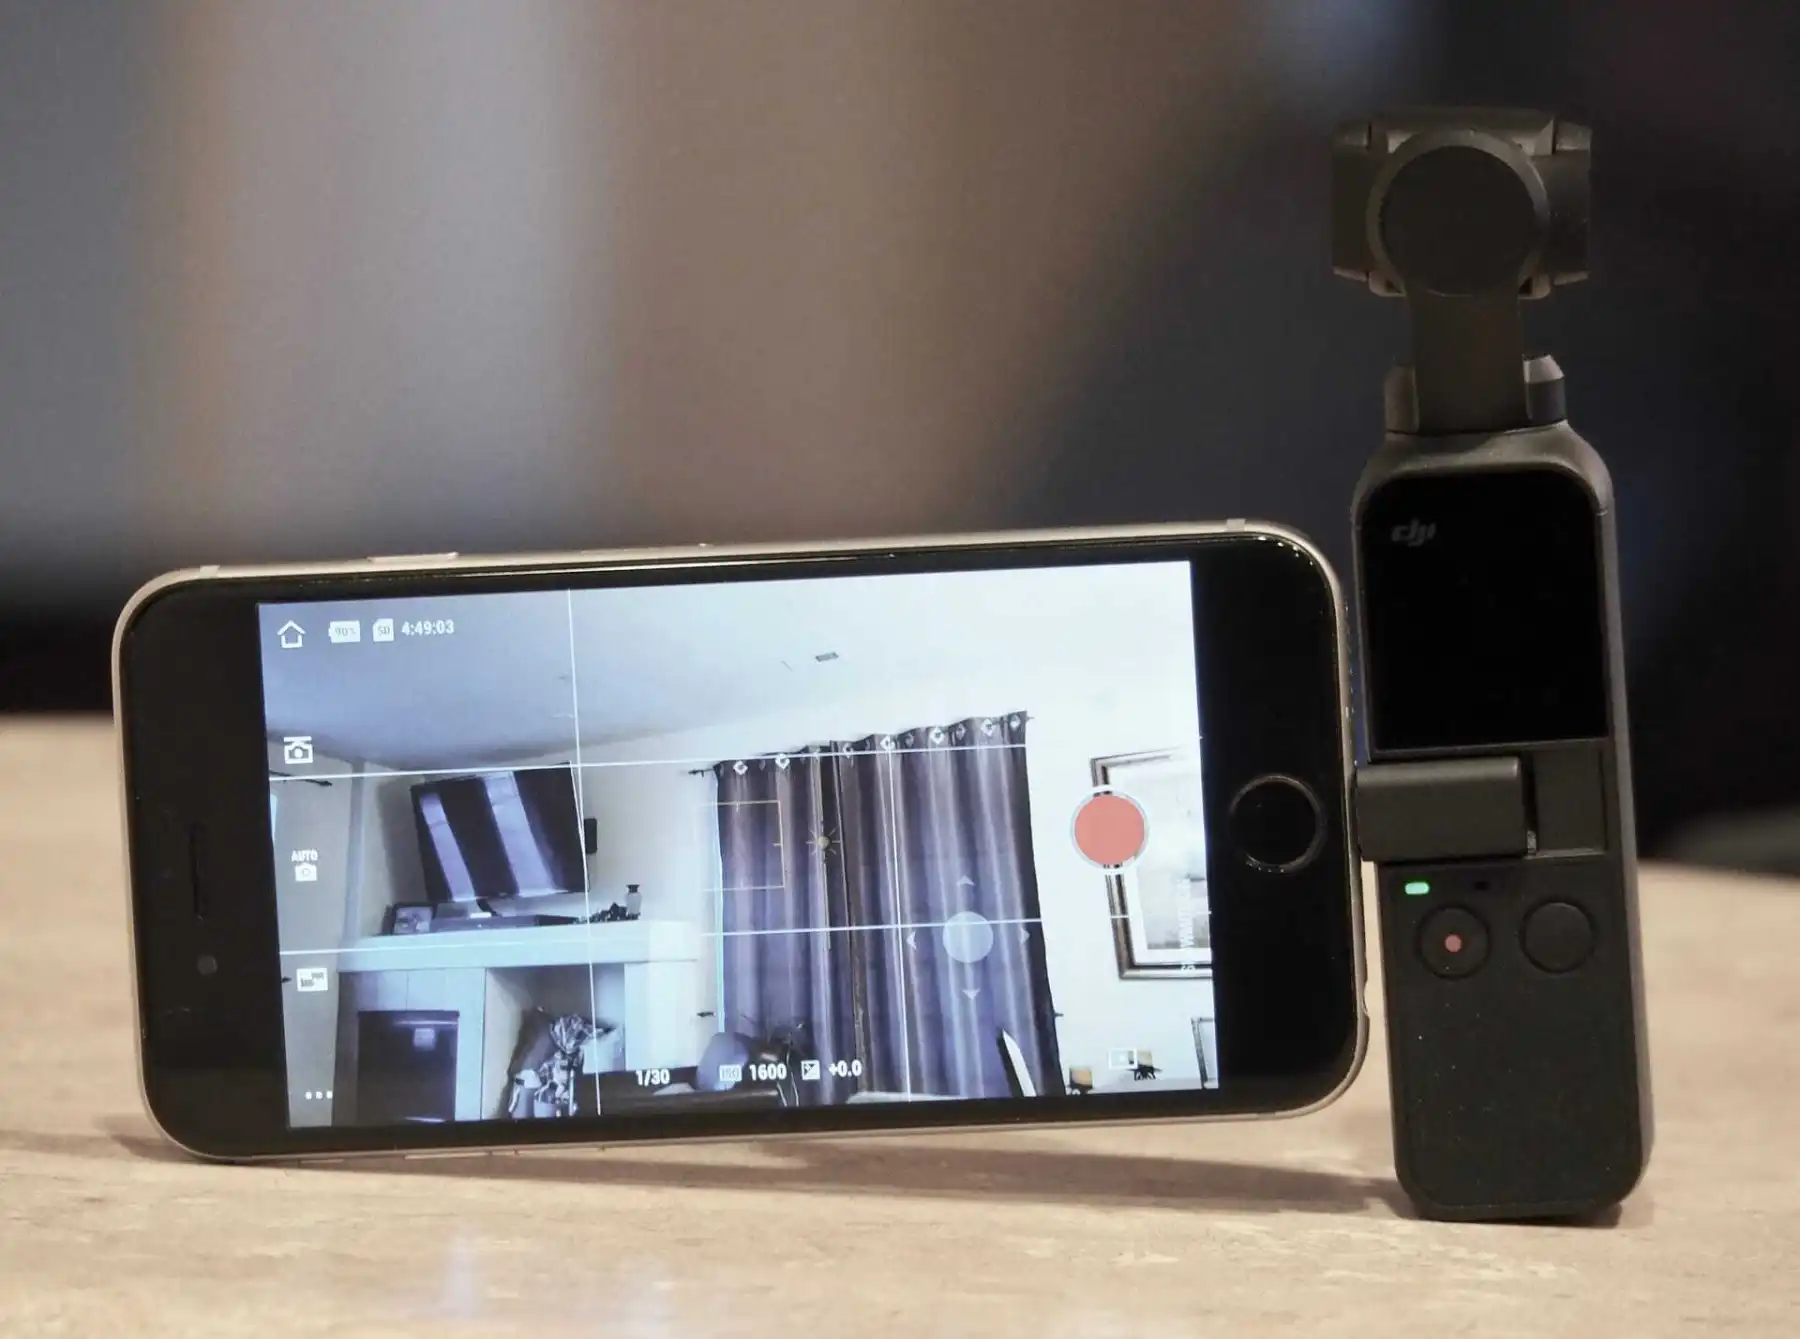 Using our phone as a larger screen for the DJI Osmo Pocket